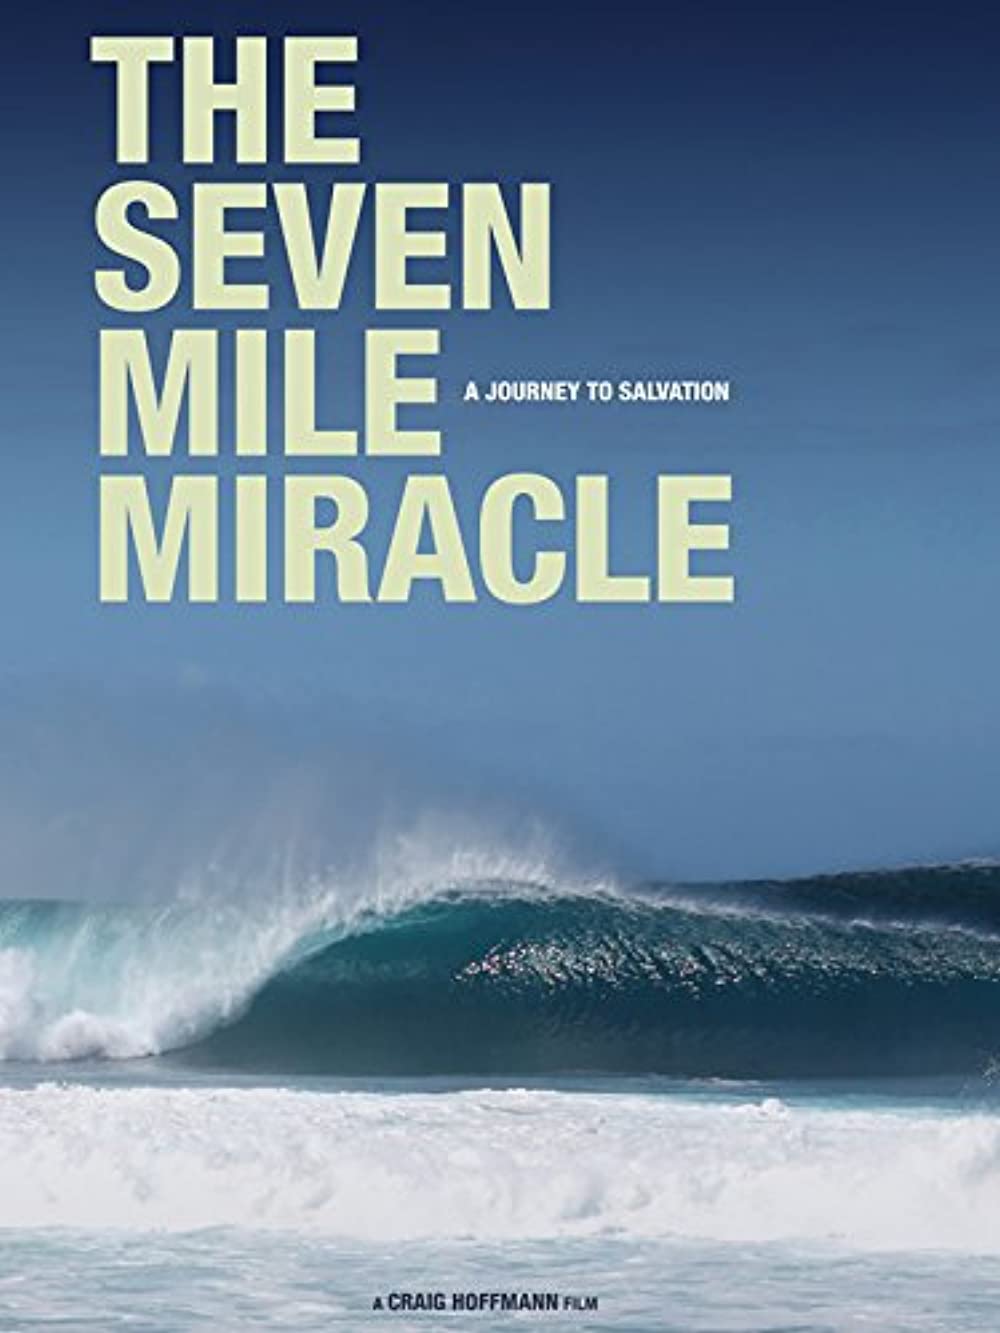 Download The Seven Mile Miracle Movie | The Seven Mile Miracle